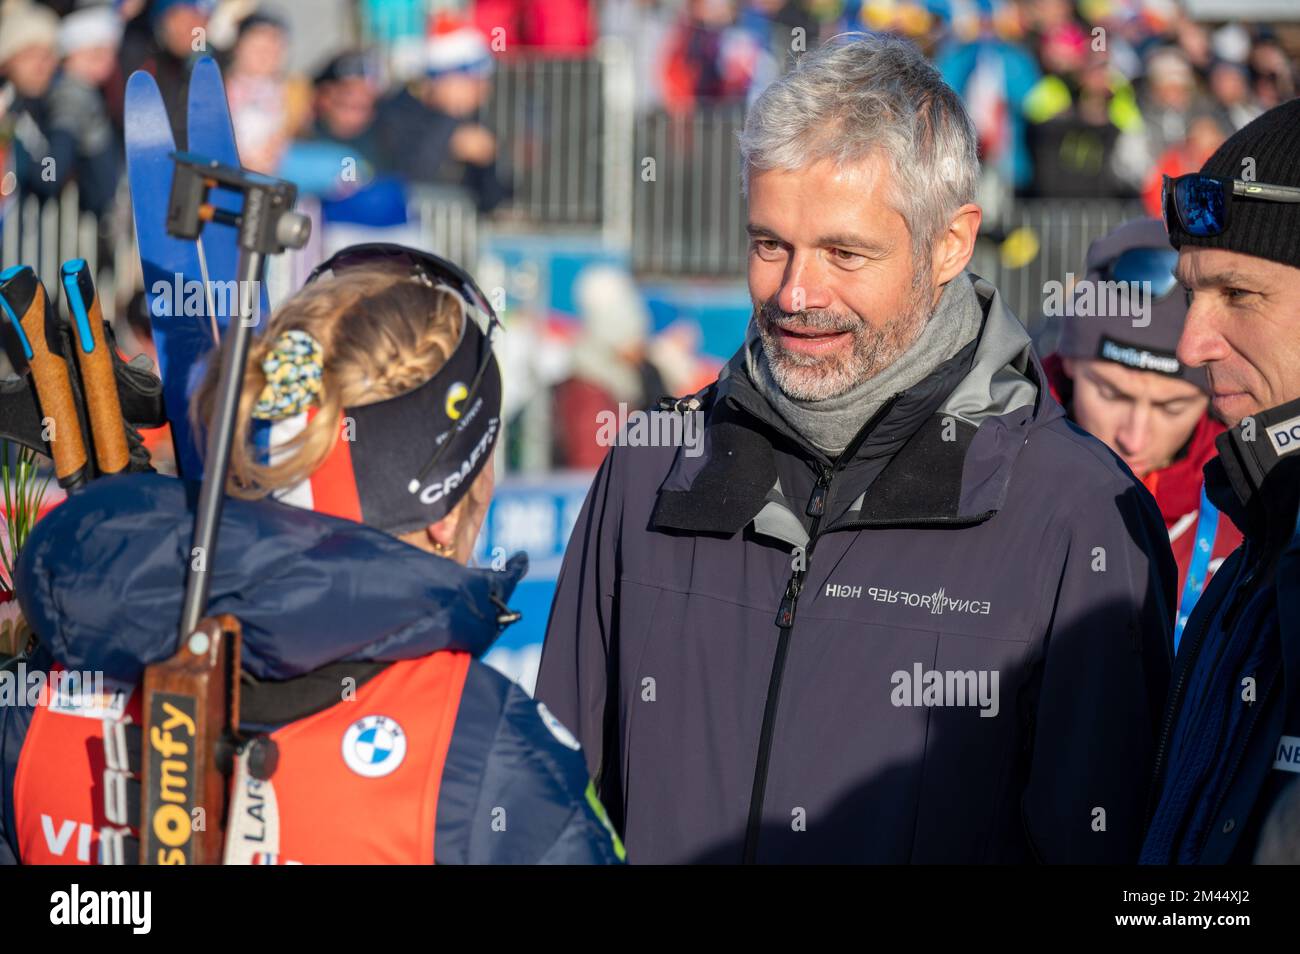 Le Grand-Bornand, France - December 18, 2022, Laurent WAUQUIEZ during the  BMW IBU World Cup 2022, Annecy - Le Grand-Bornand, Women's 12,5 Km Mass  Start, on December 18, 2022 in Le Grand-Bornand,